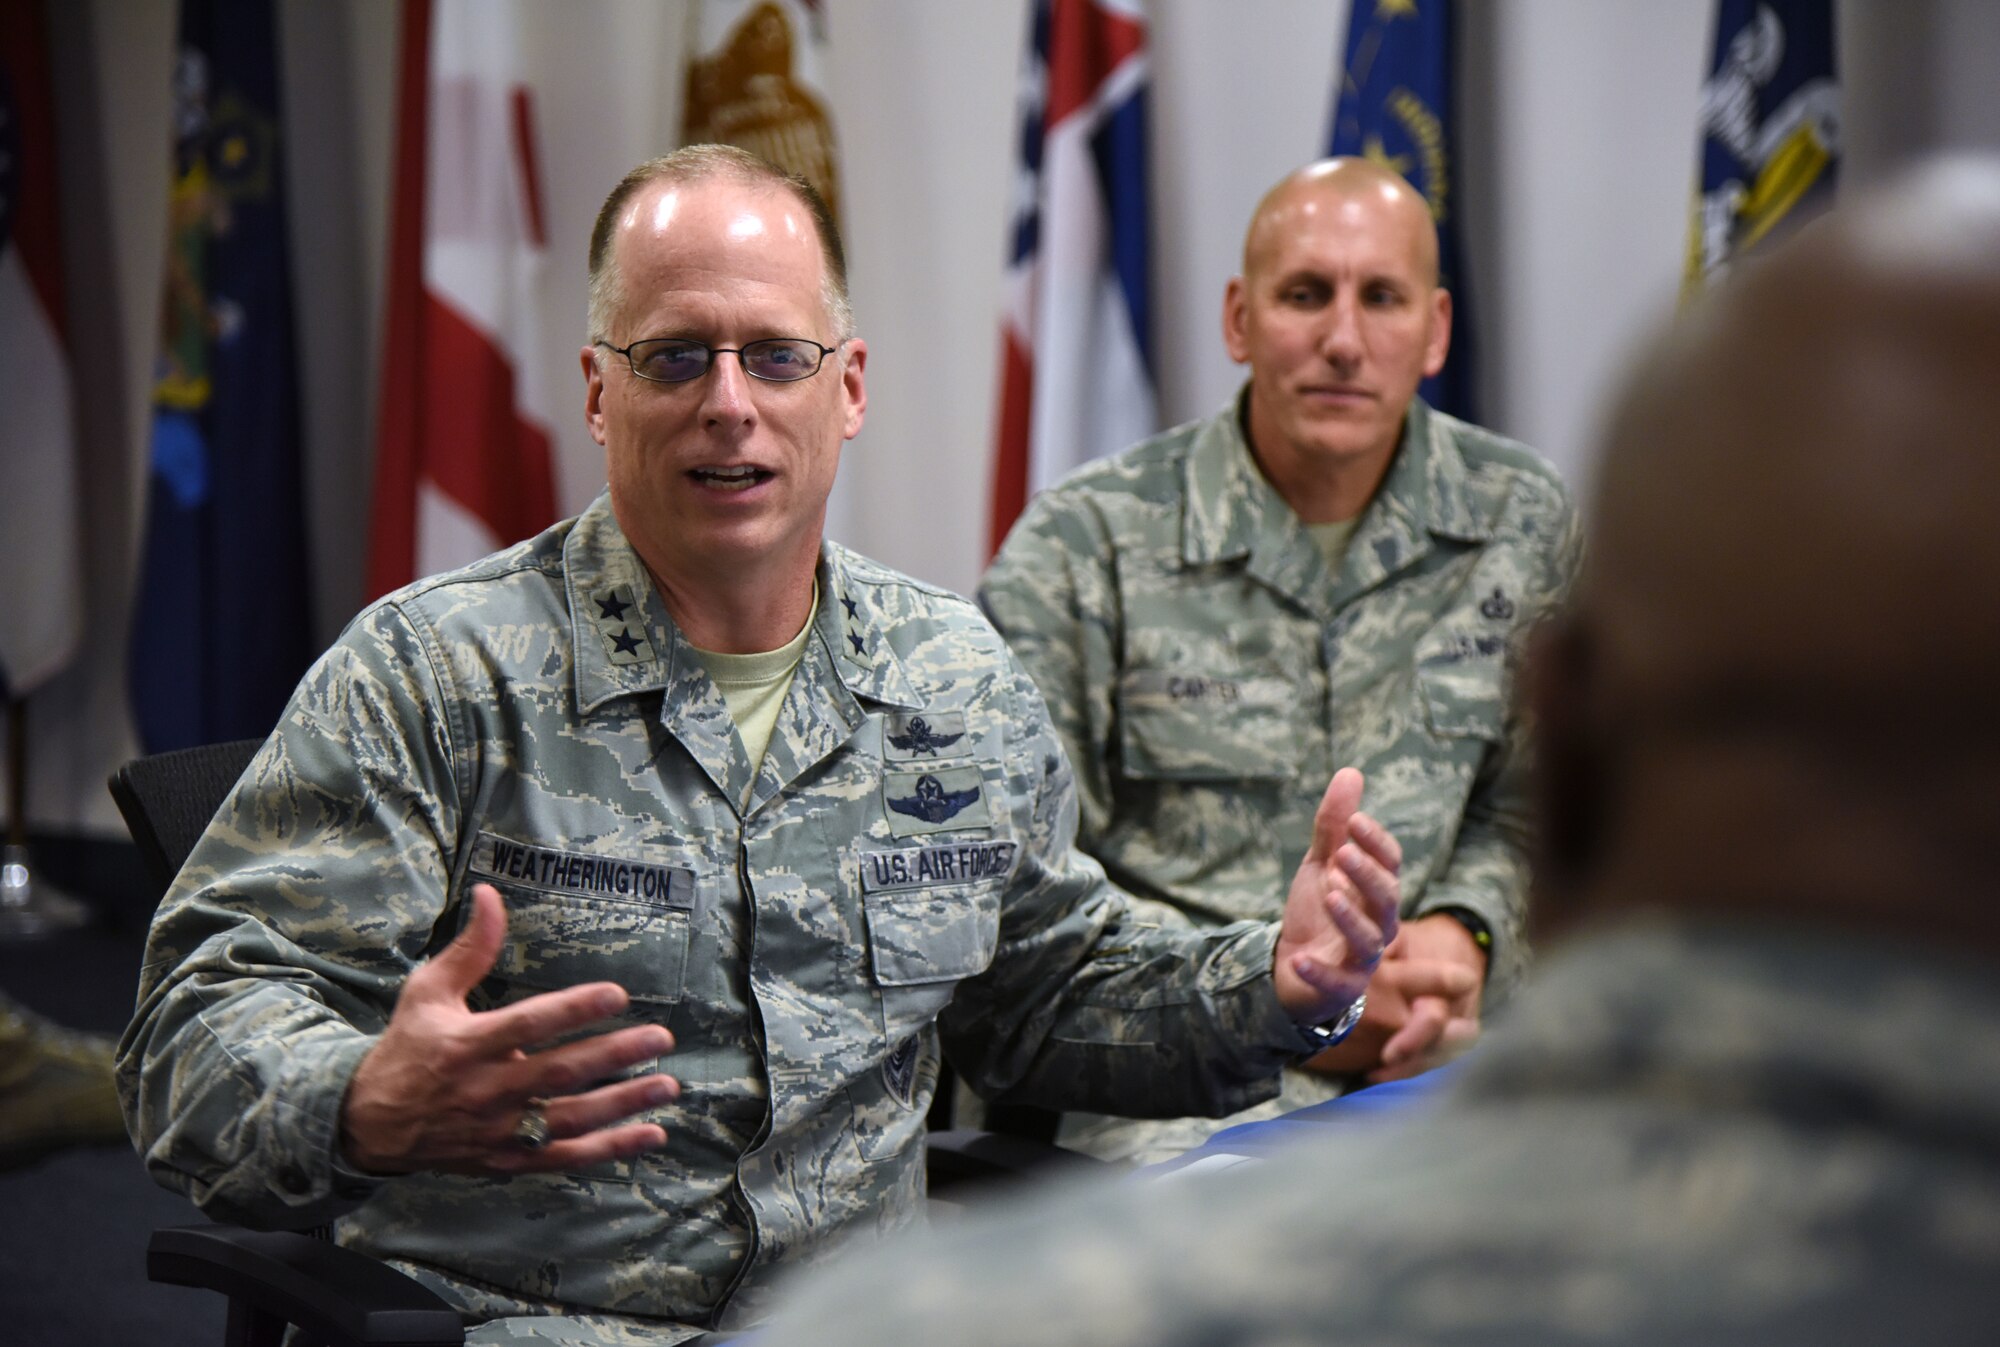 U.S. Air Force Maj. Gen. Mark Weatherington, Air Education and Training Command deputy commander, speaks during an 81st Training Group mission briefing at the Levitow Training Support Facility during a site visit on Keesler Air Force Base, Mississippi, July 11, 2018. Weatherington also received an 81st Training Wing mission briefing followed by a windshield tour of the base to become more familiar with Keesler’s mission. (U.S. Air Force photo by Kemberly Groue)